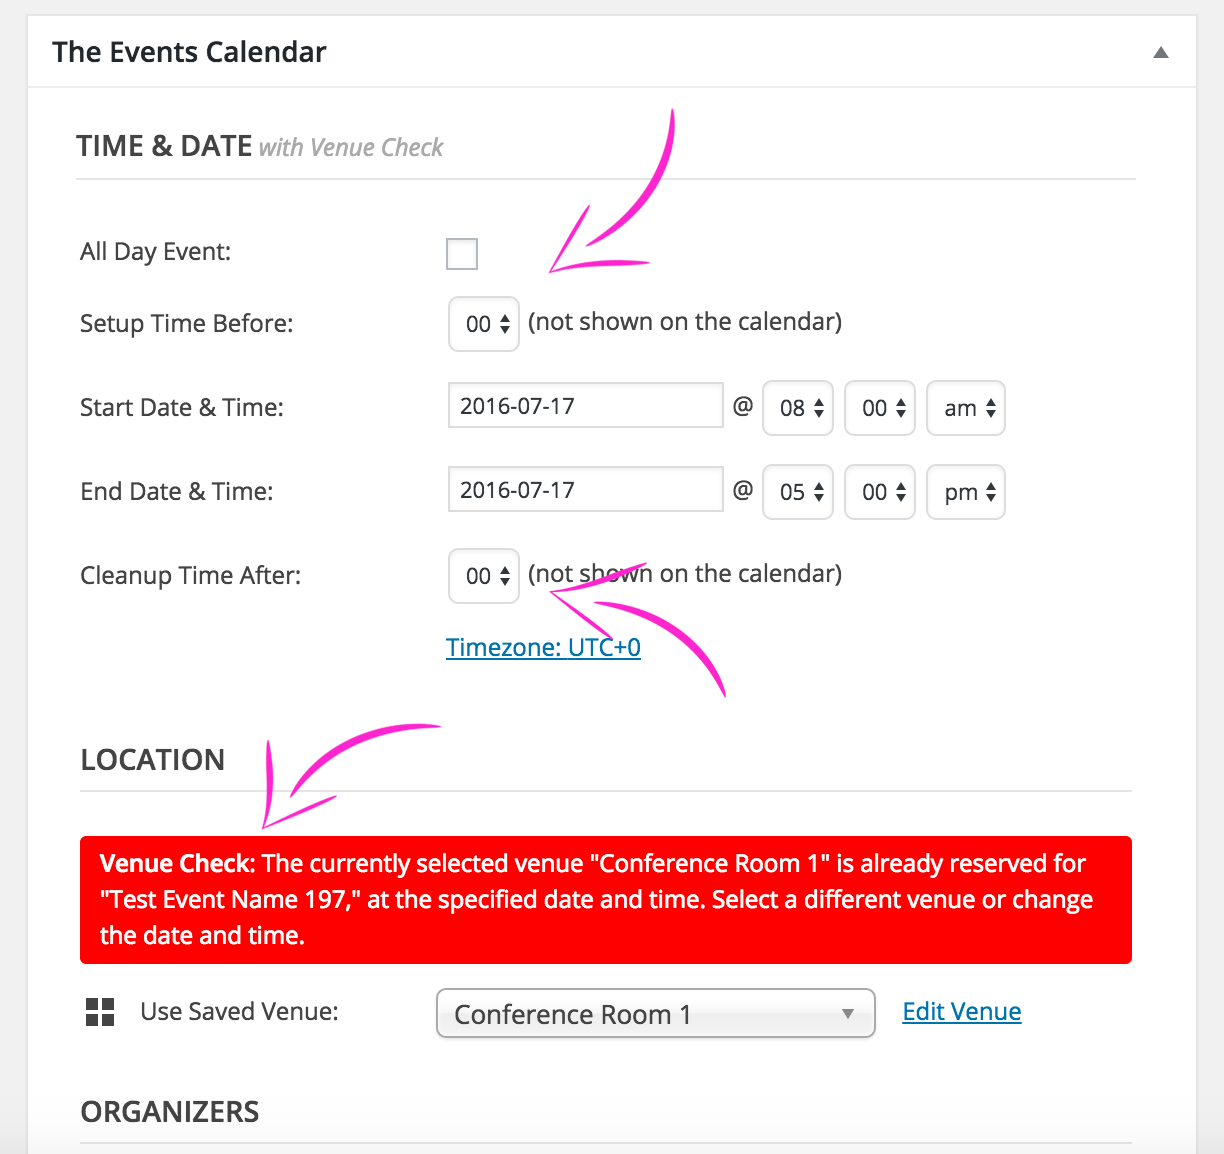 This is a screenshot that shows the Date & Time section with the Venue Check indicator and the Setup and Cleanup times. It also shows an existing conflict for the Venue dropdown menu.